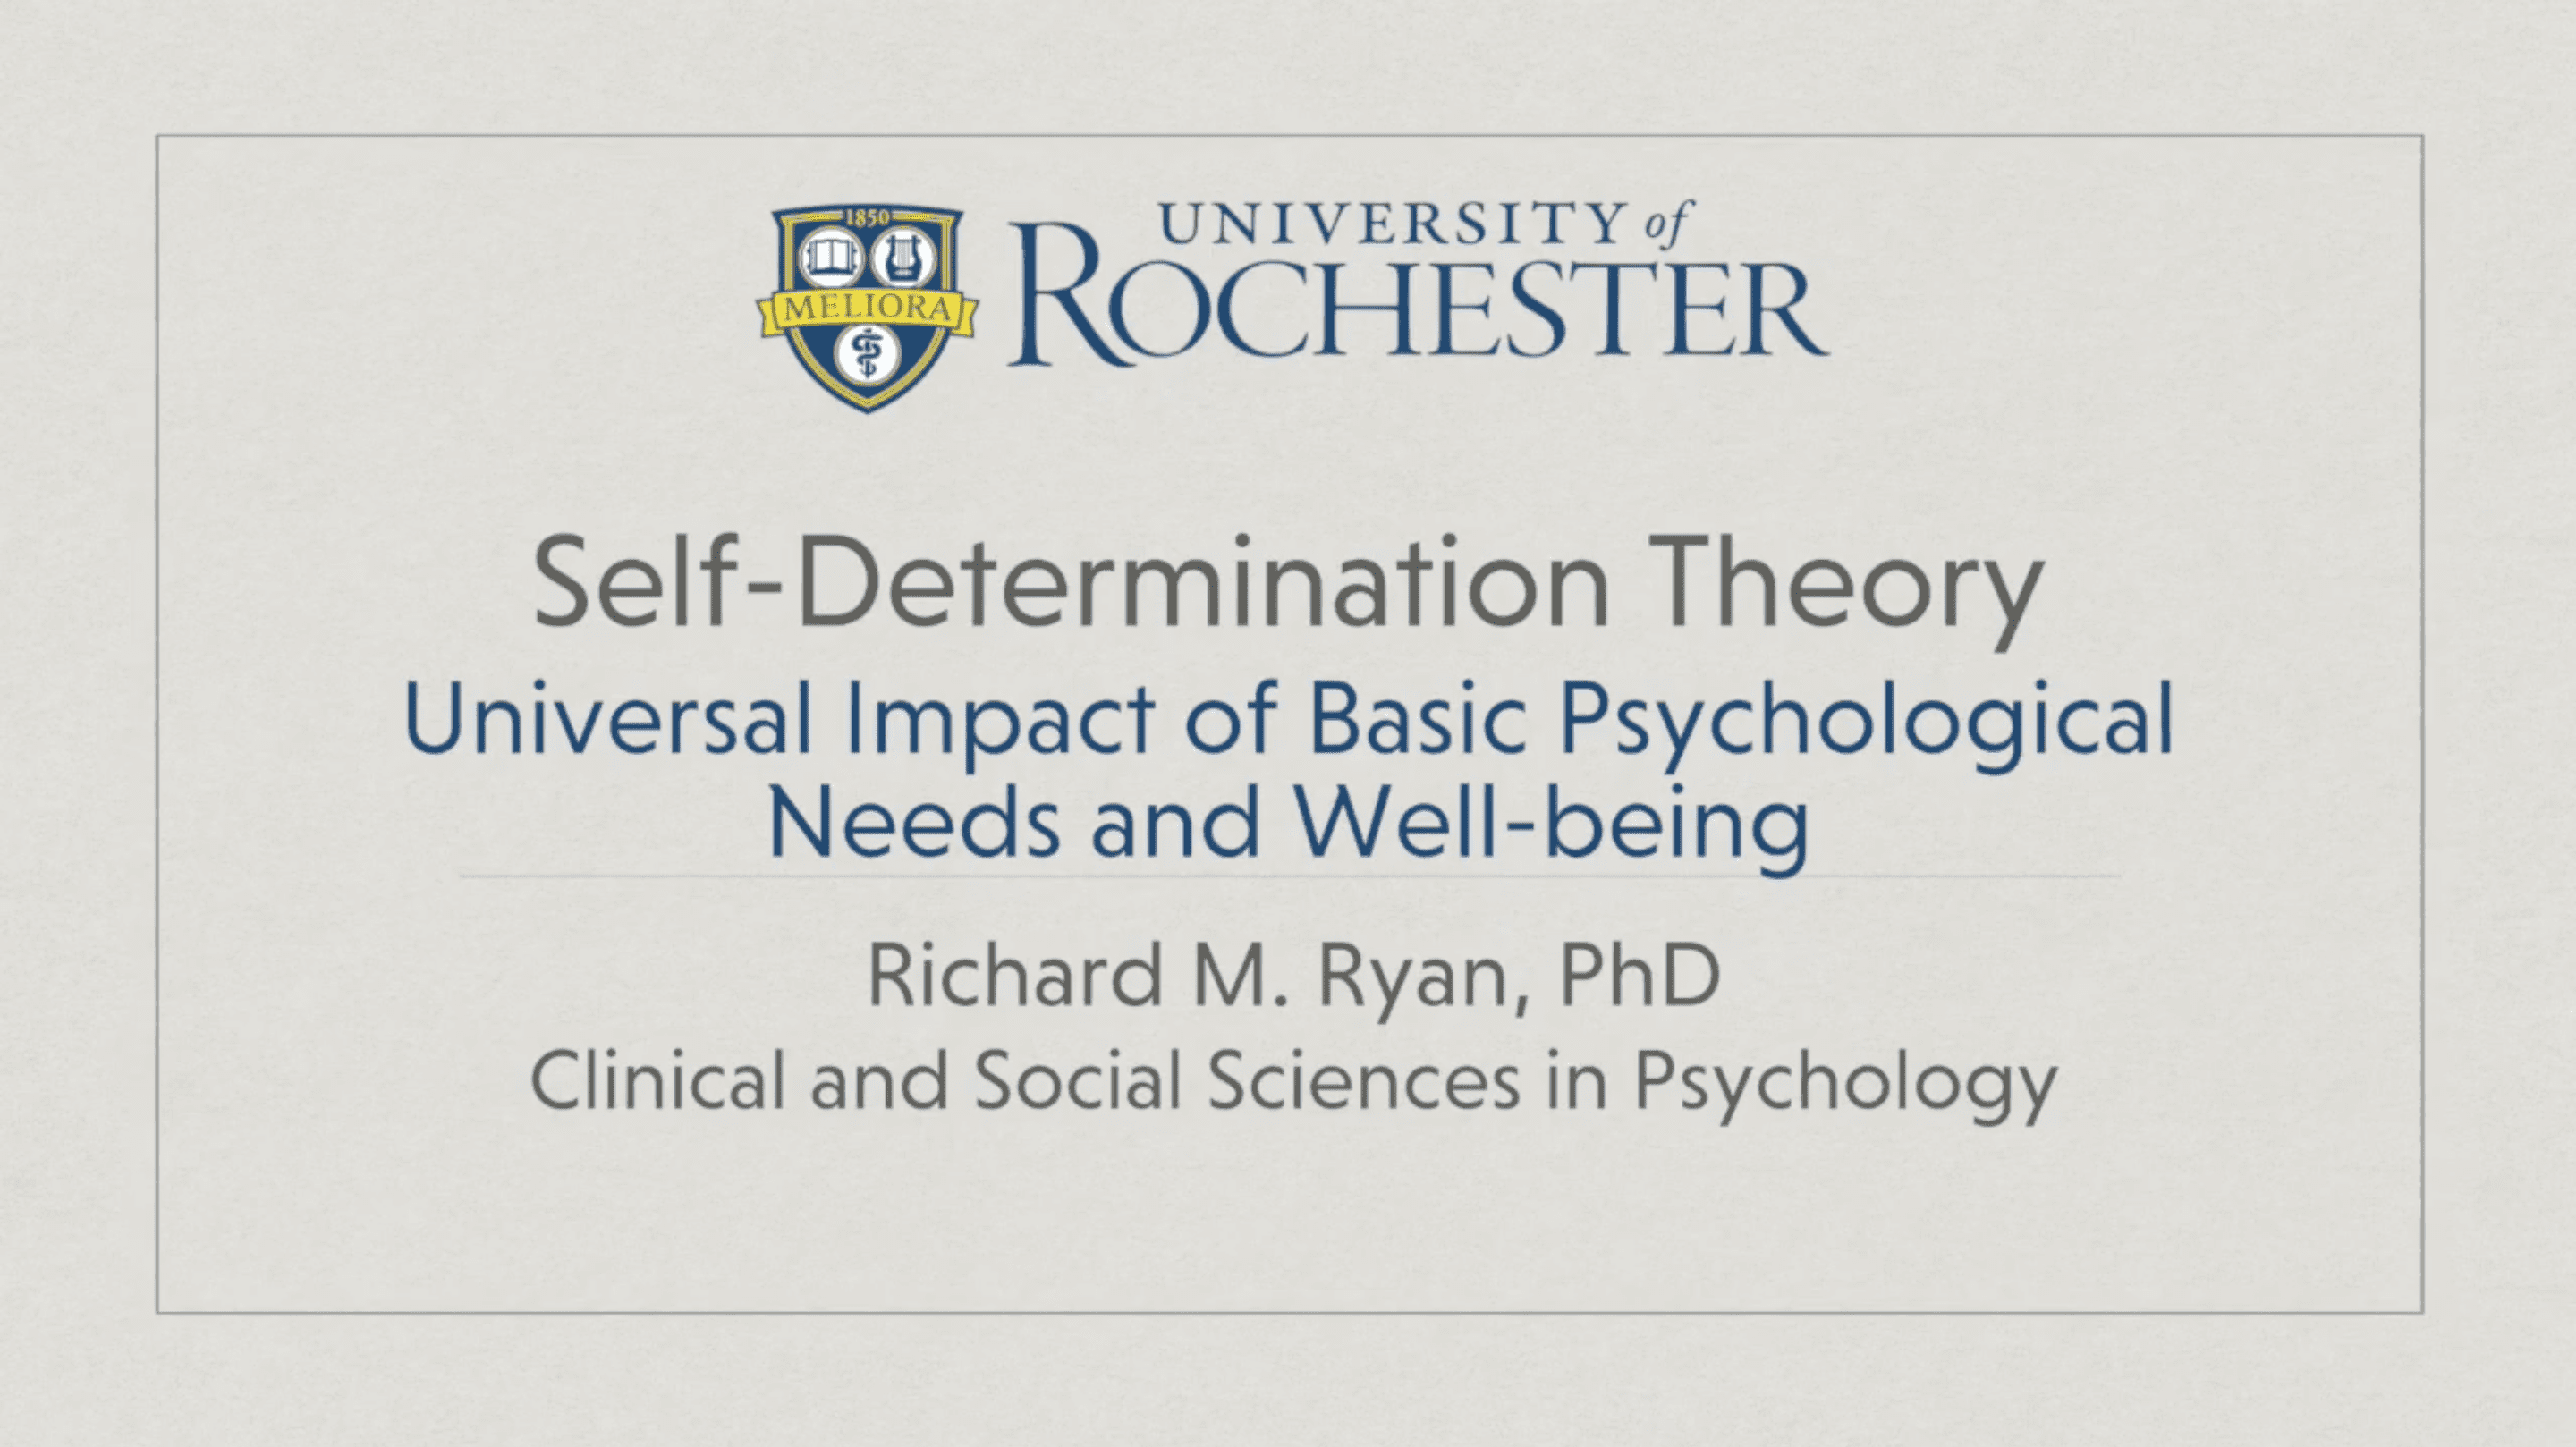 Universal Impact of Basic Psychological Needs on Wellbeing Coursera video with Richard M Ryan